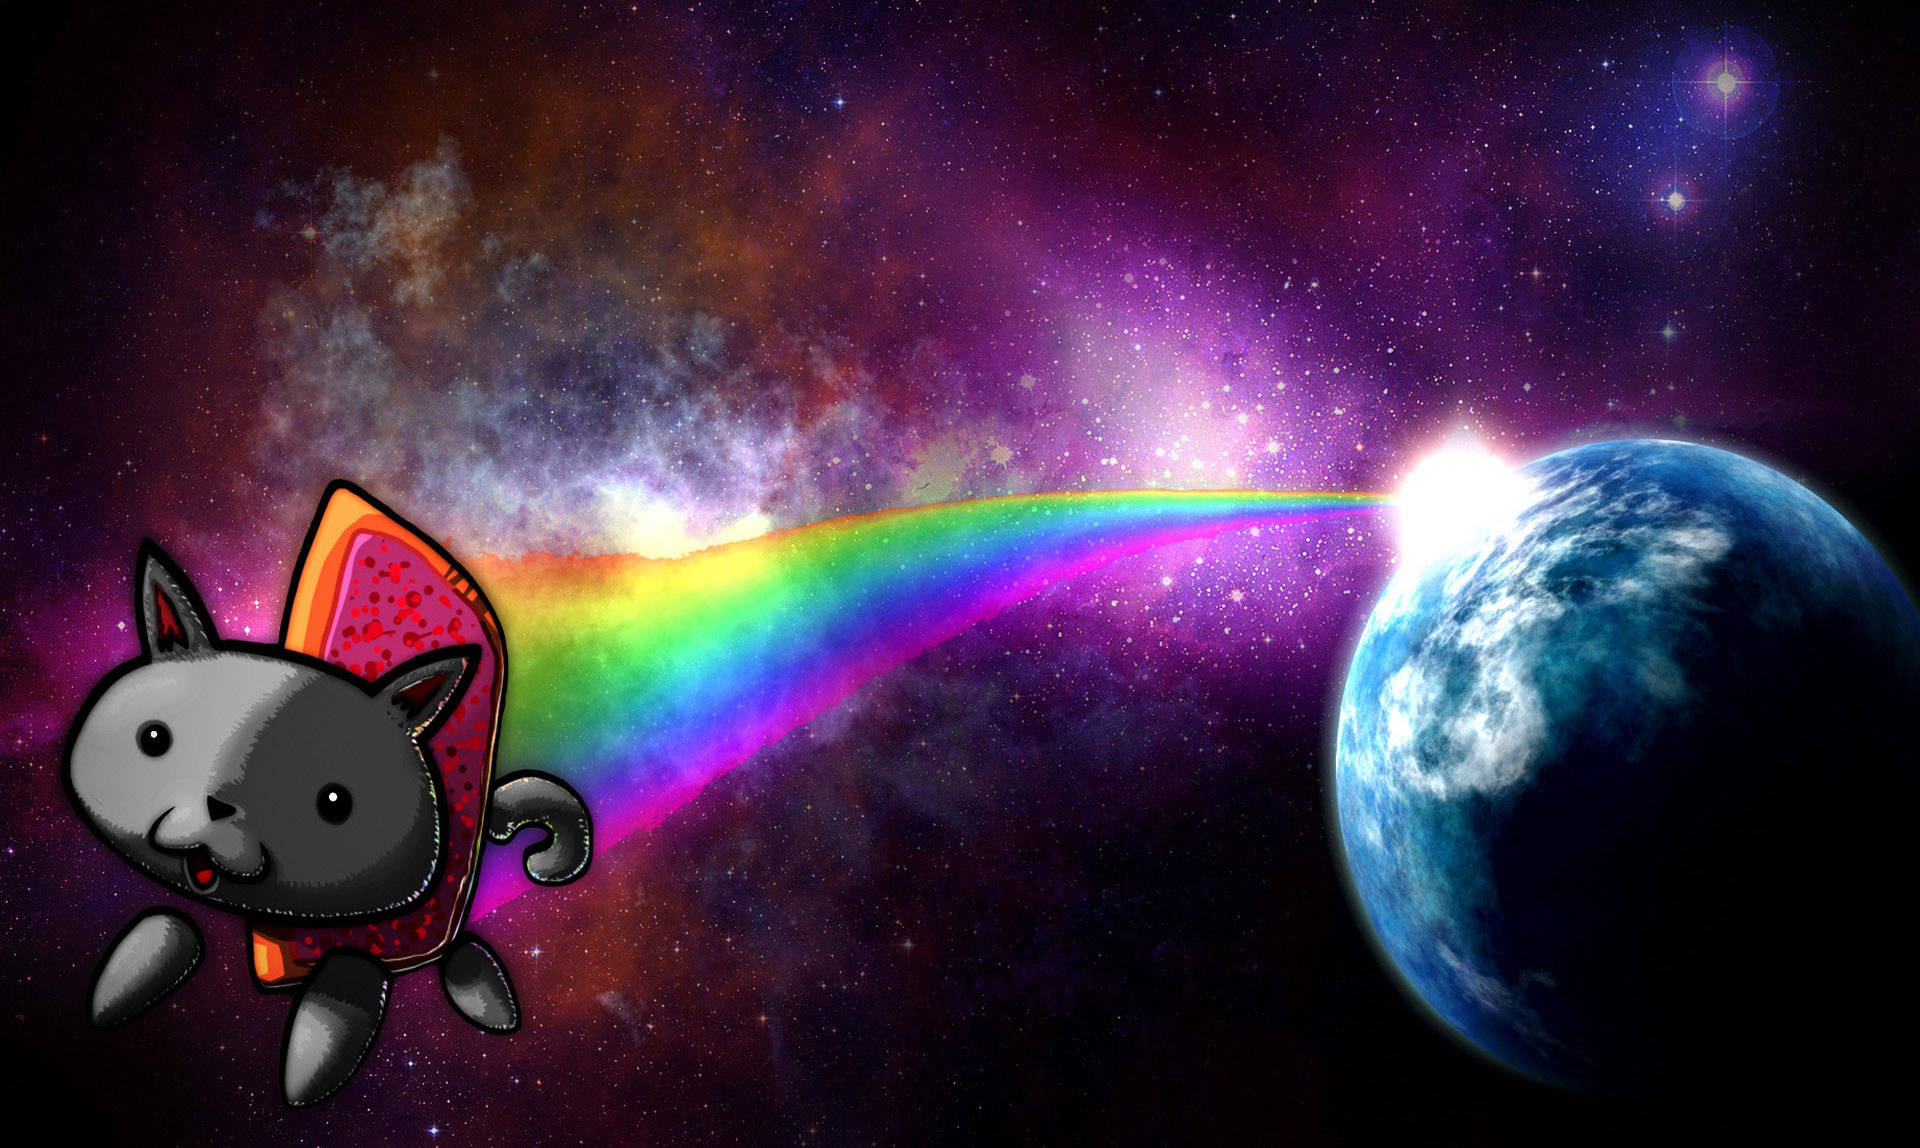 Nyan Cat with bread costume flying in outer space over the rainbow.